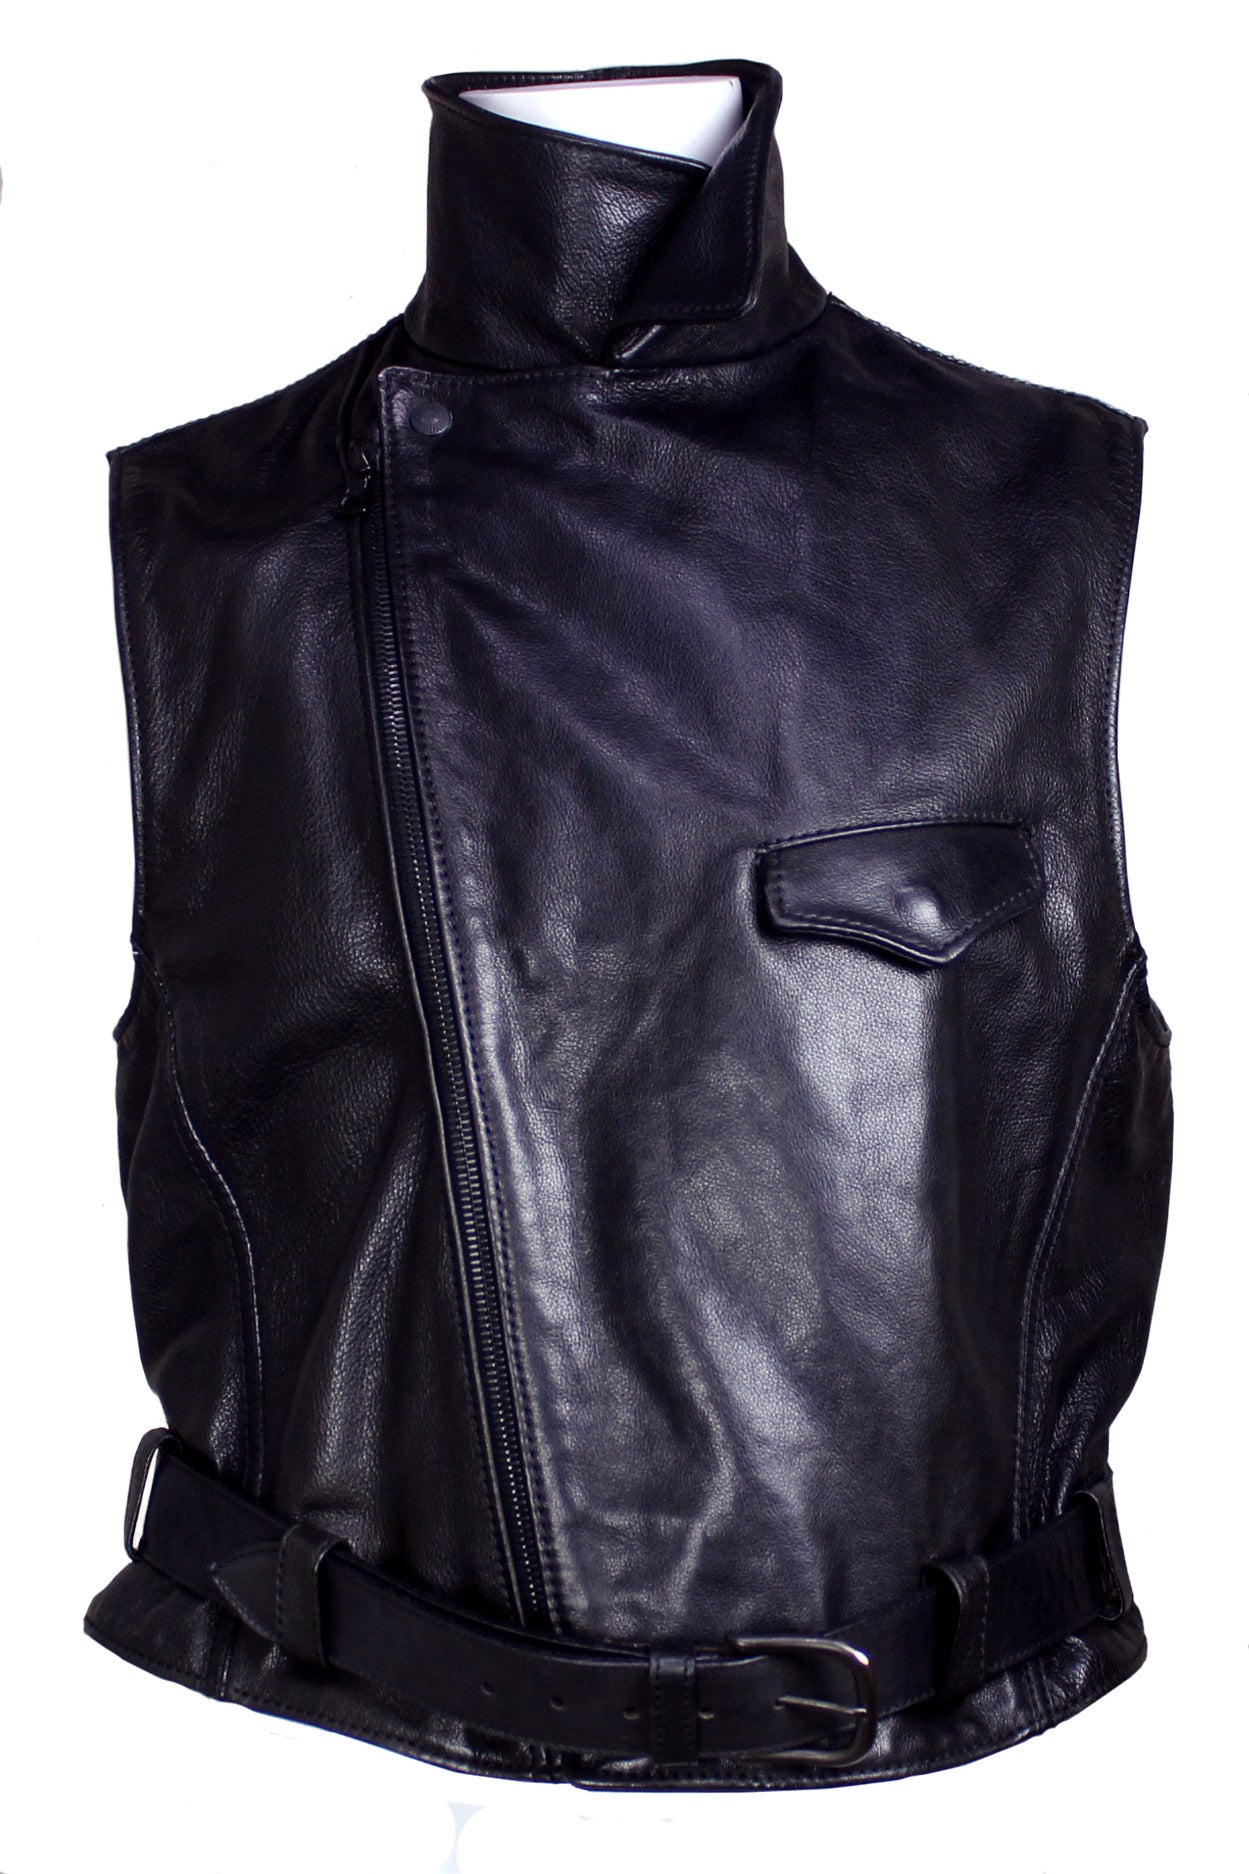 Ruffo has produced leather pieces using the highest quality leather for fashion houses such as Versace, Prada, and Dolce & Gabbana. This sleeveless motorcycle vest is a classic design with a zip up front breast patch pocket and belted waist.